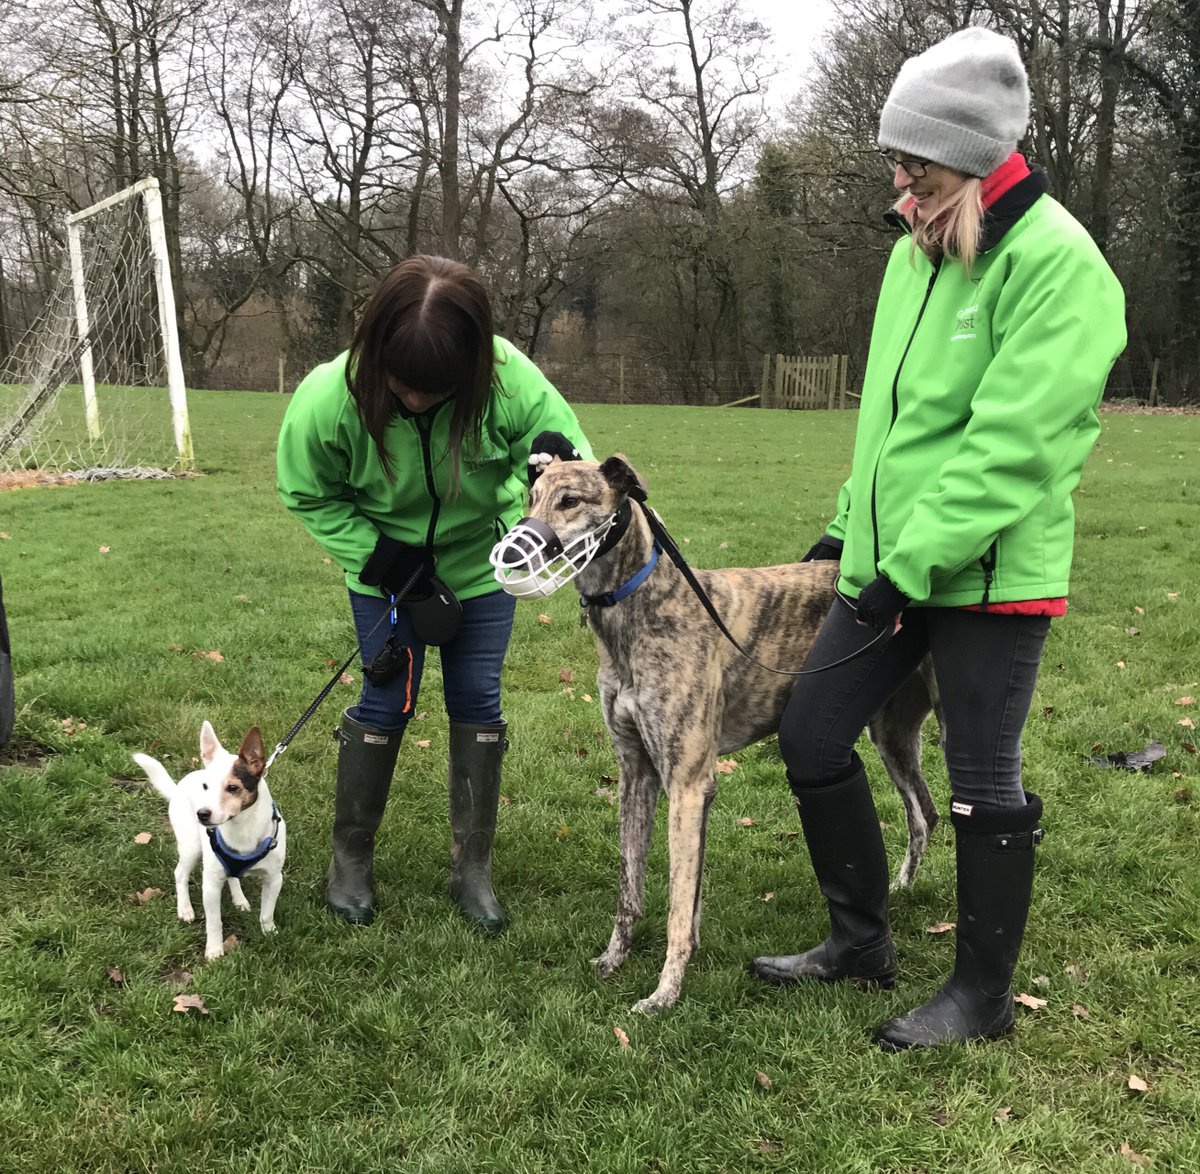 Volunteers Karen & Libby brought their little dog Bailey up to the kennels this morning to help with the small animal testing. New hound Chaz was more than happy to say hello and was very well behaved! #needsahome C